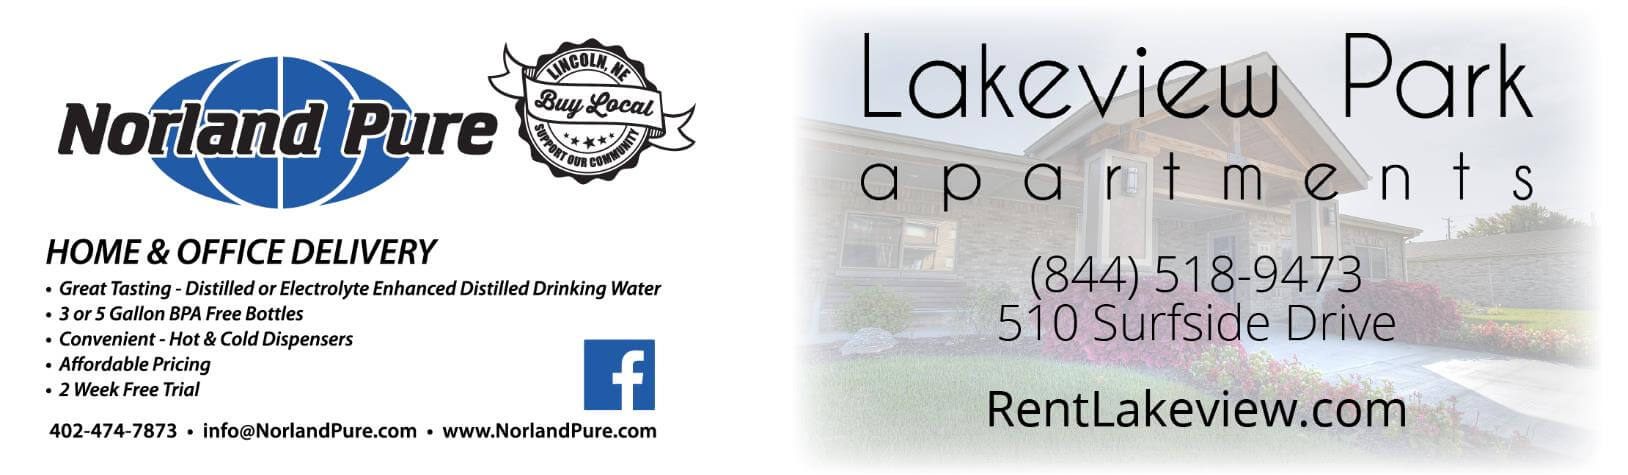 Norland Pure co-op label for Lakeview Park Apartments